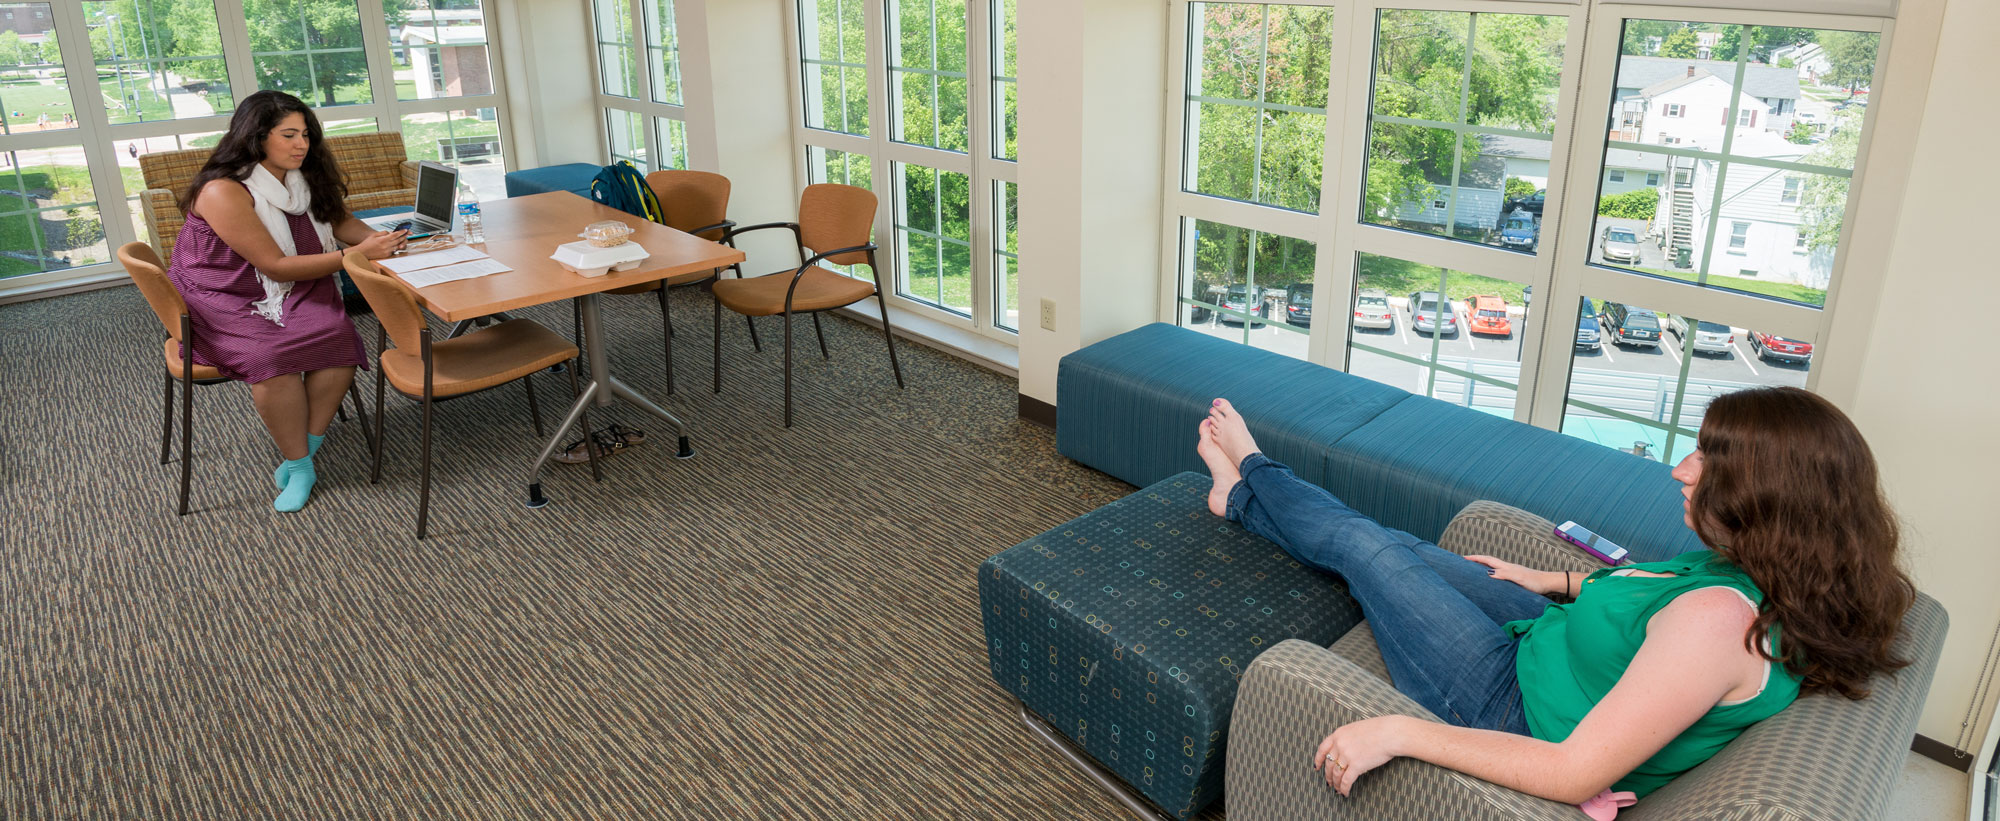 Students relaxing in lounge with comfortable furniture and lots of windows